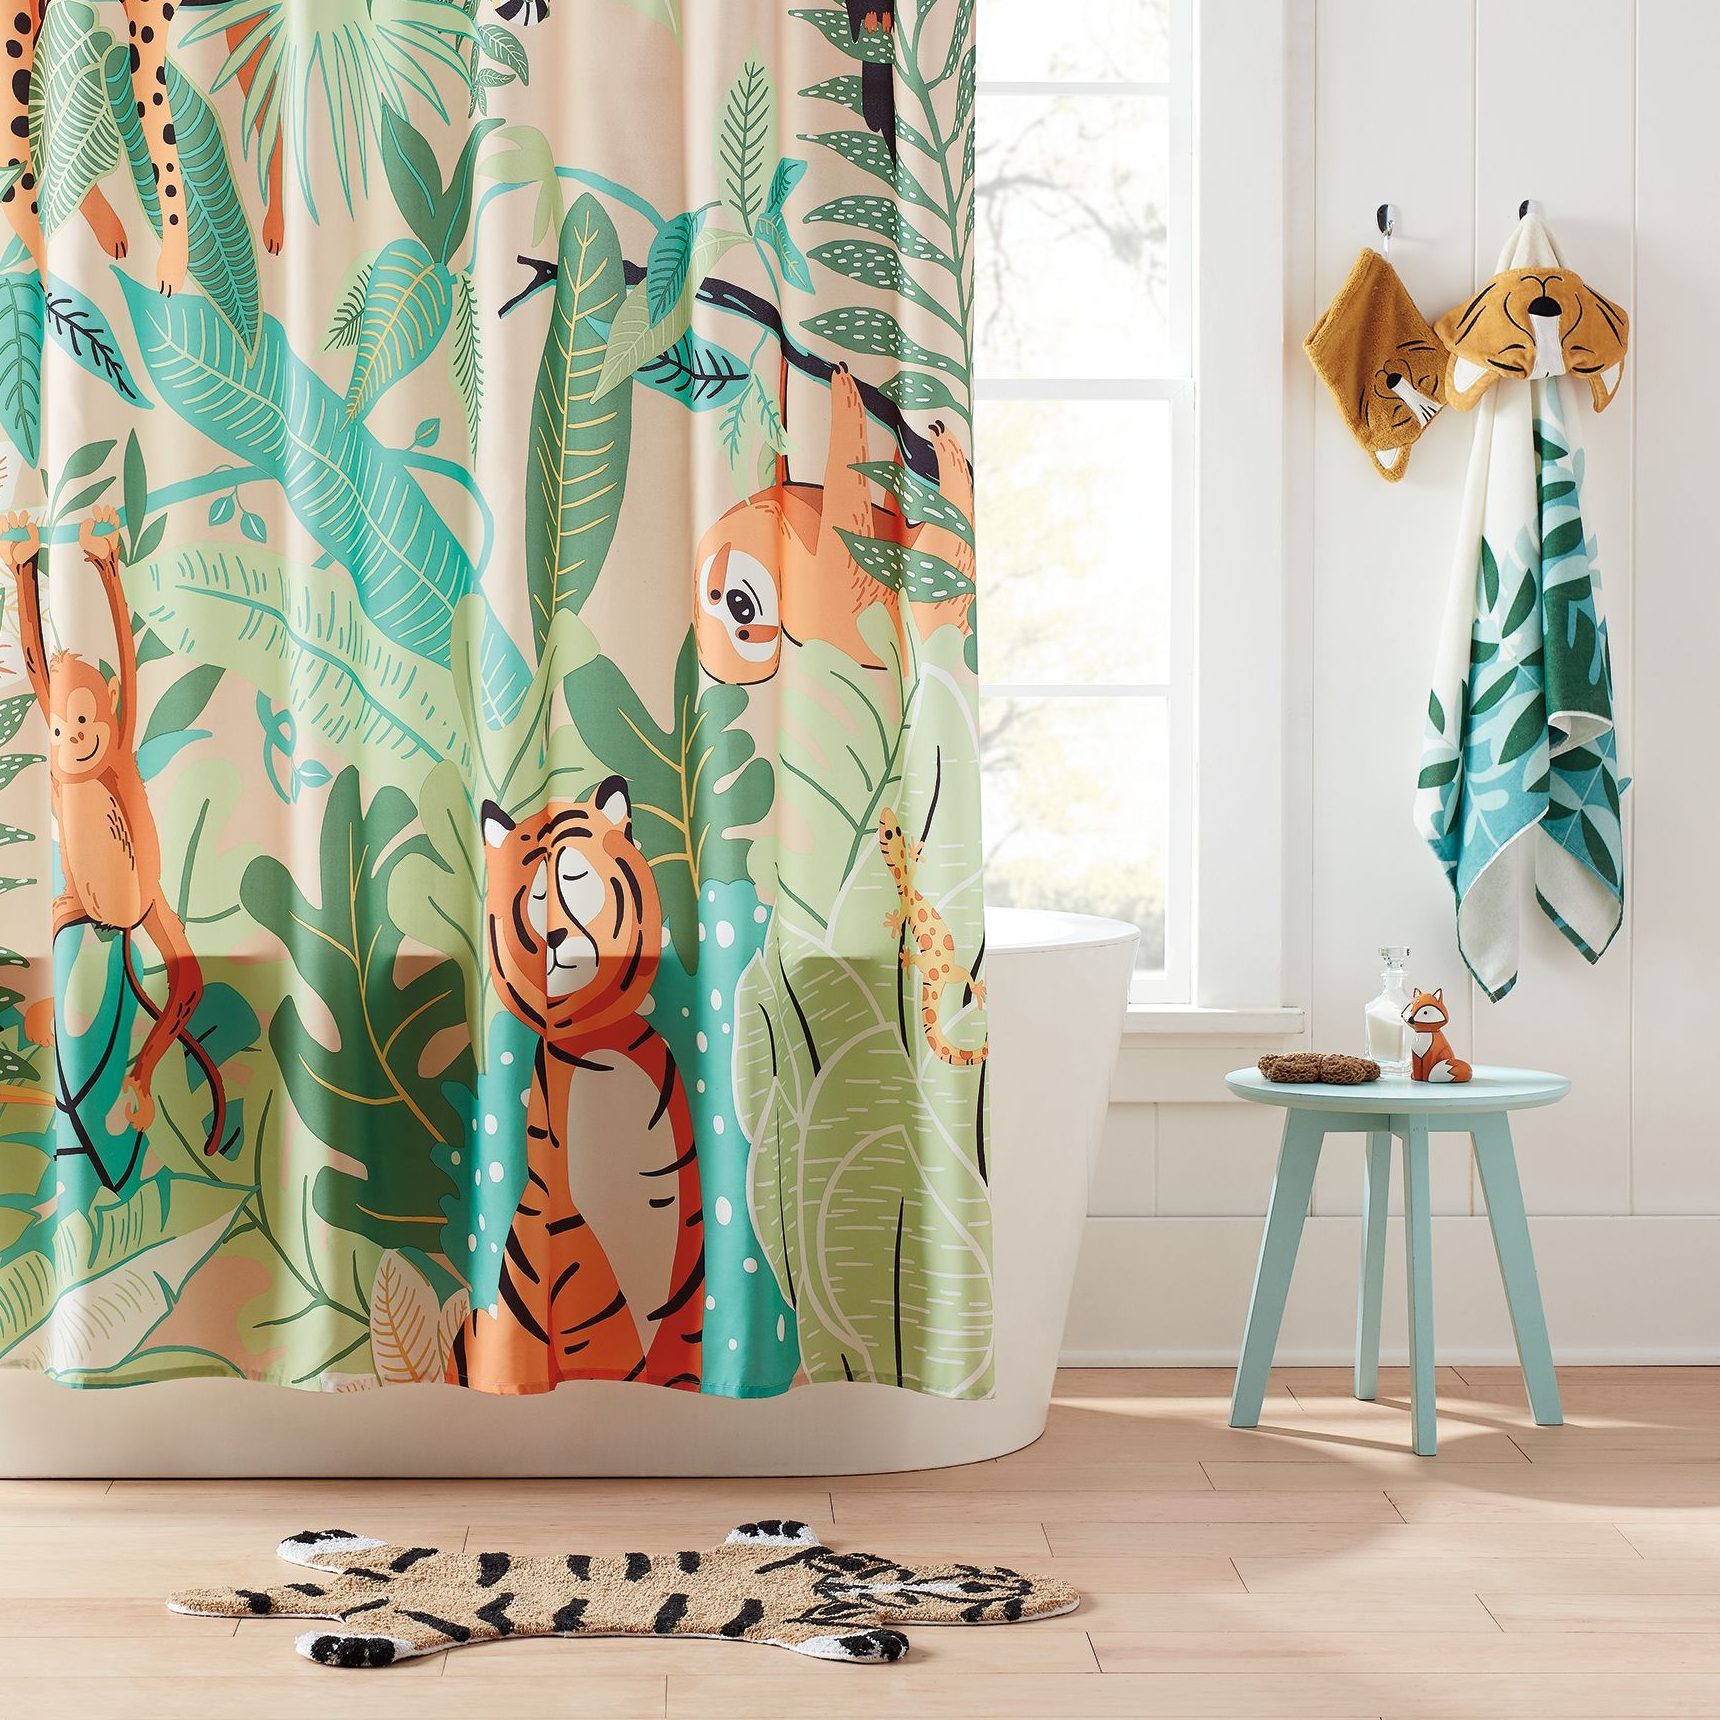 5 Best Shower Curtains for Any Bathroom